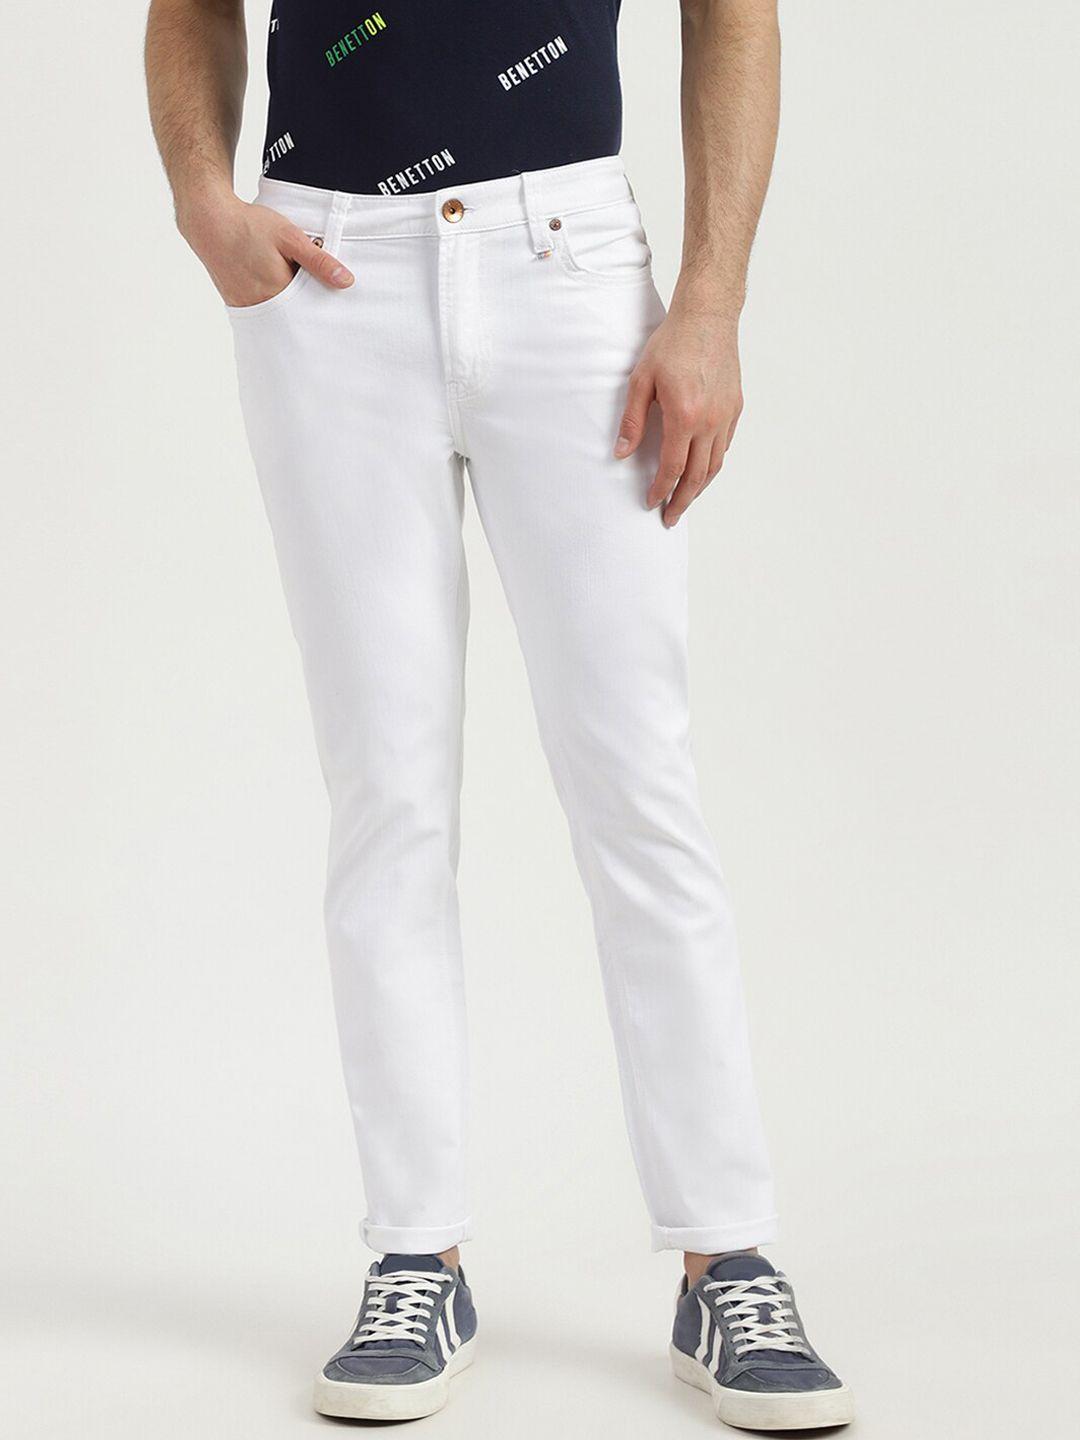 united colors of benetton men white cotton skinny fit jeans